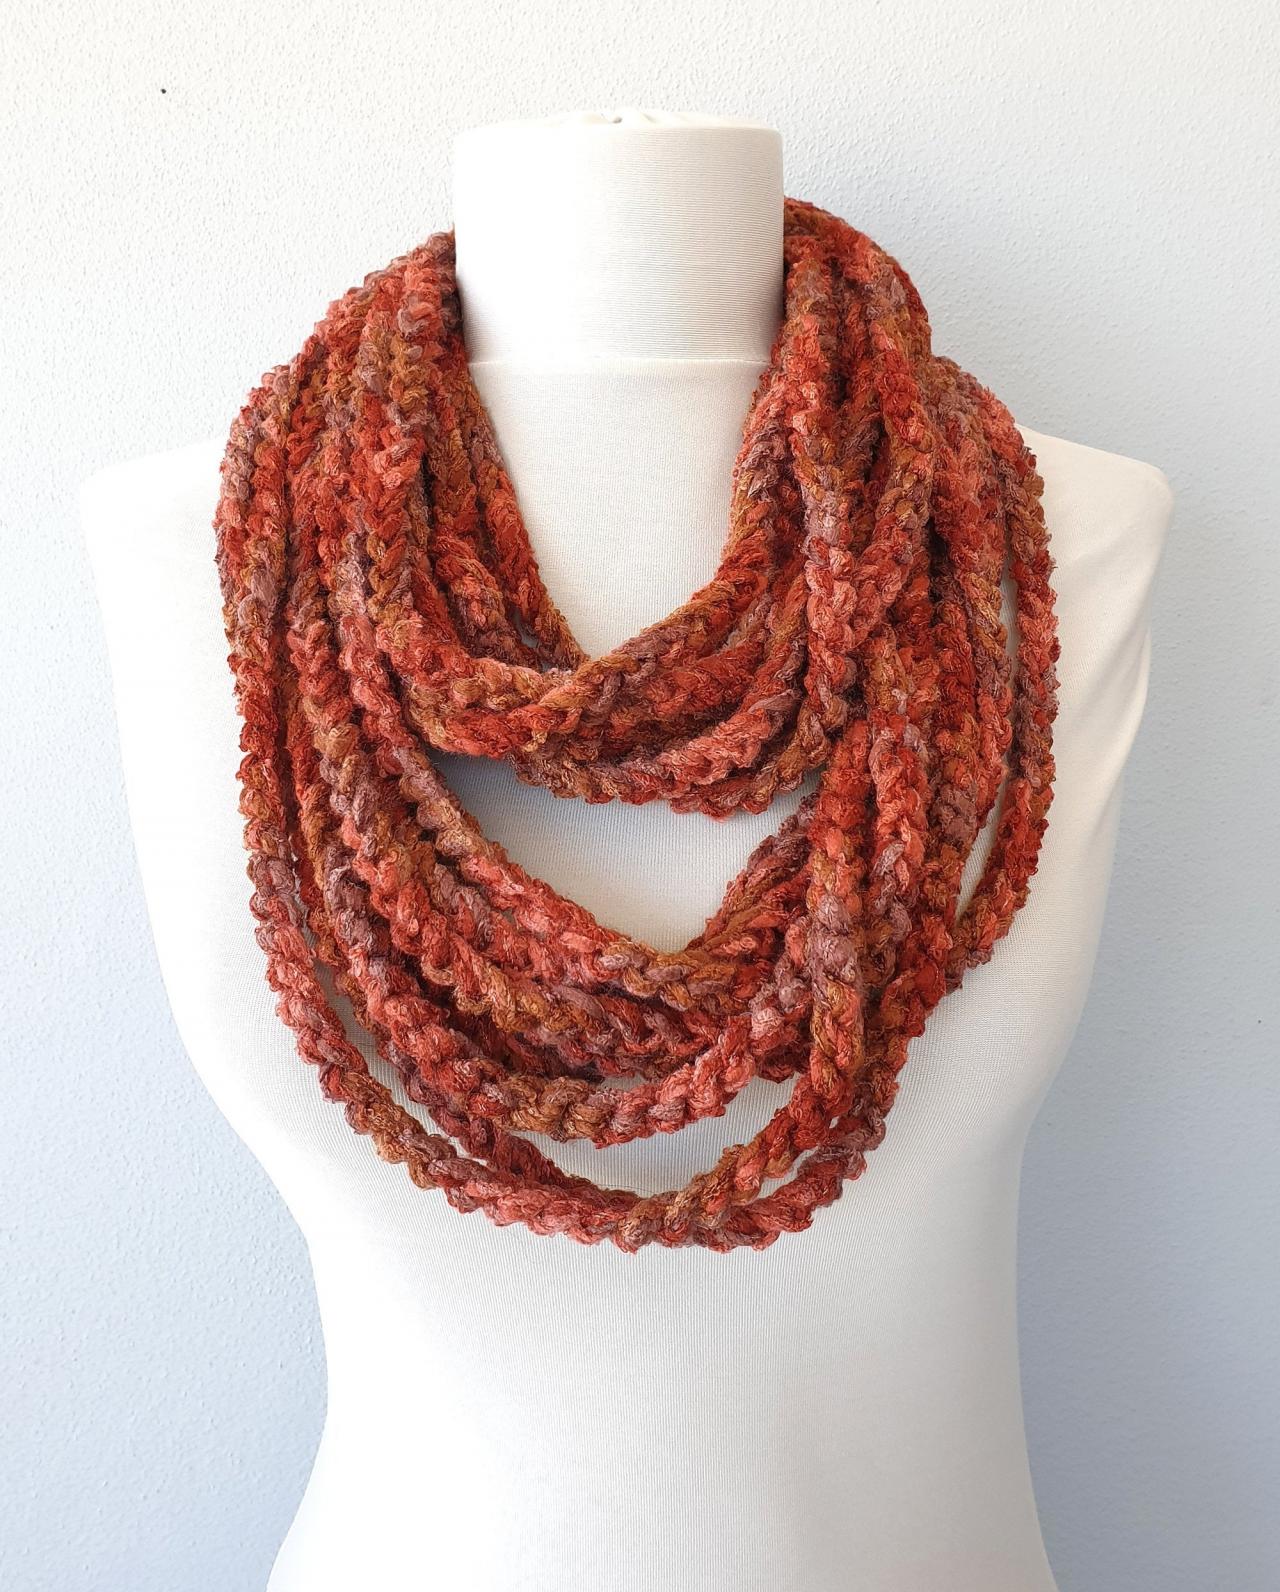 Rust Brown Scarf Necklace, Crochet Infinity Chain Scarf, Fall Fashion Scarves For Women, Gift For Her